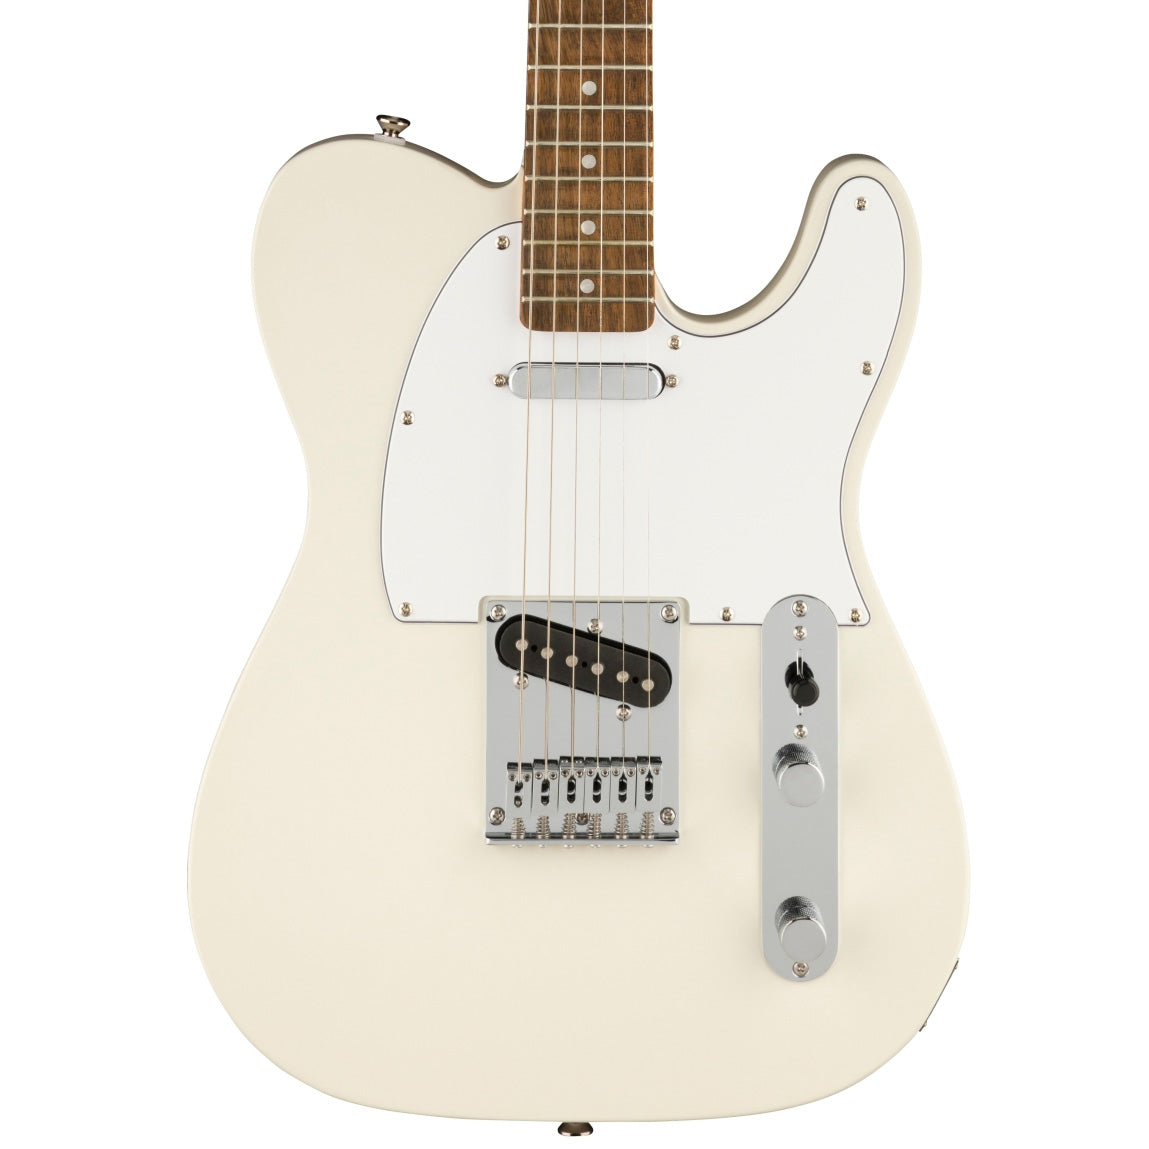 Squier Affinity Telecaster - Laurel, Olympic White View 1